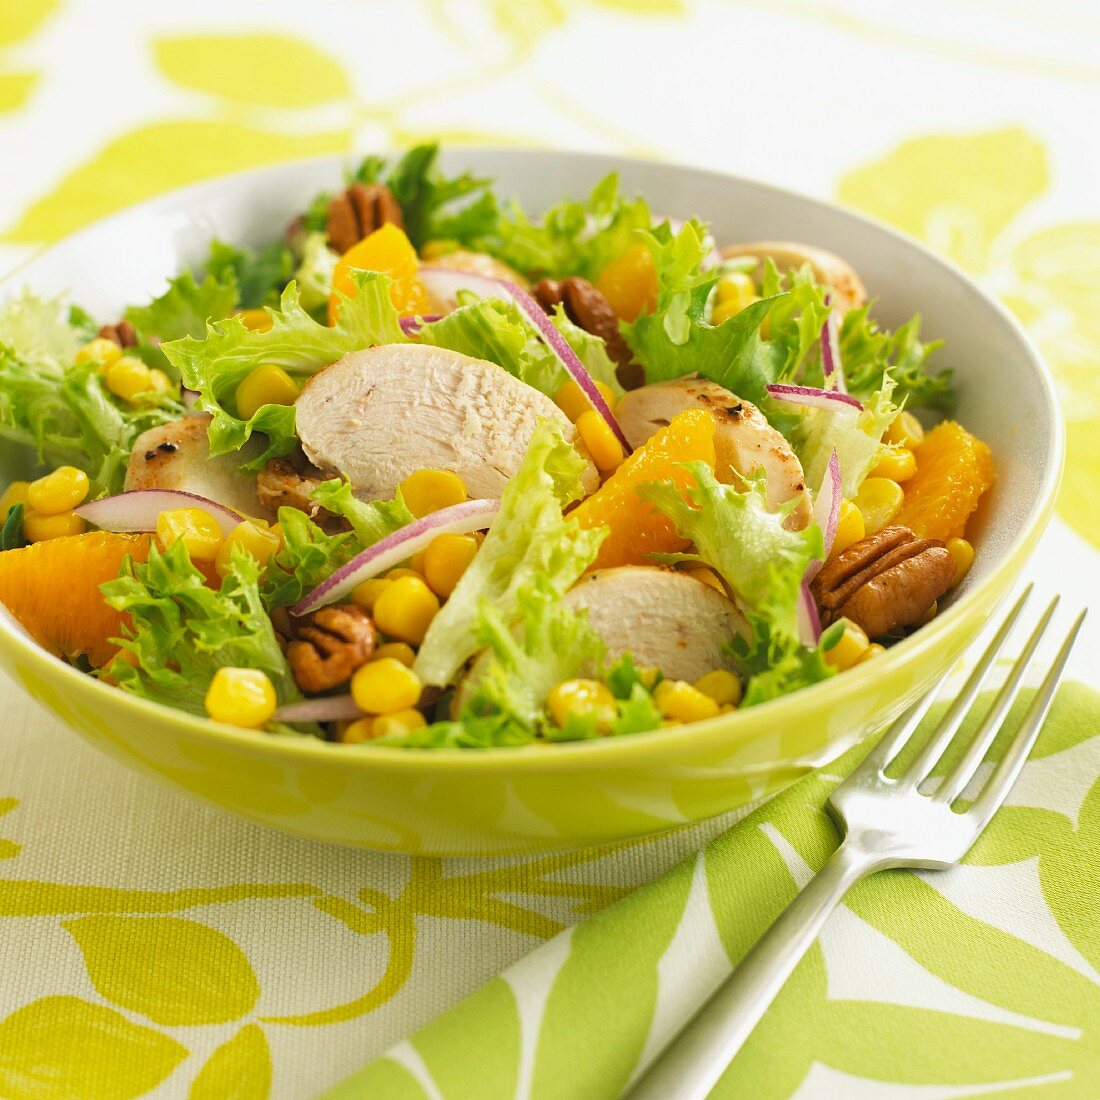 Lollo biondo lettuce with chicken oranges, sweetcorn and pecan nuts